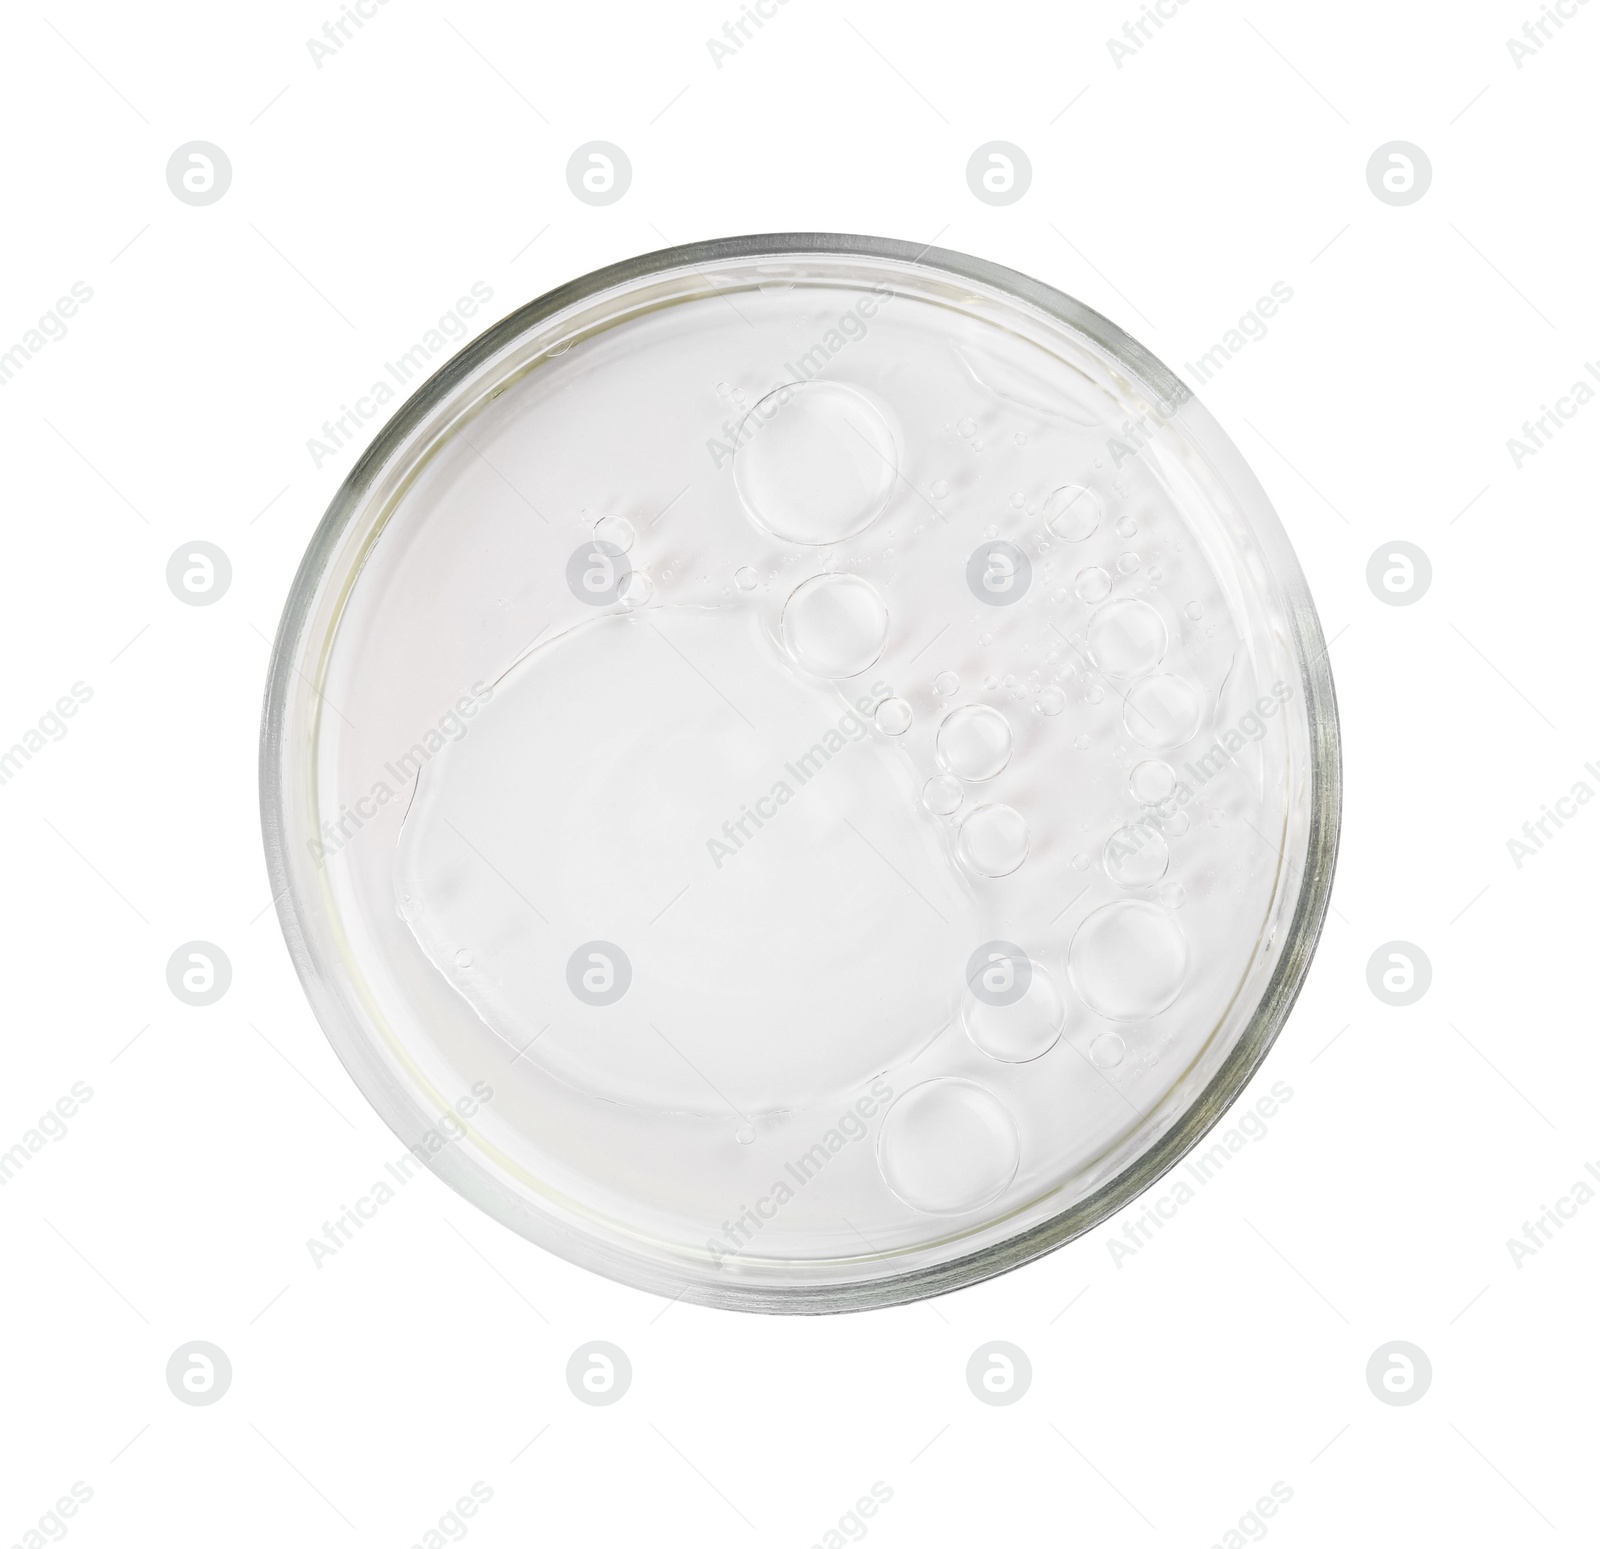 Photo of Petri dish with liquid sample isolated on white, top view